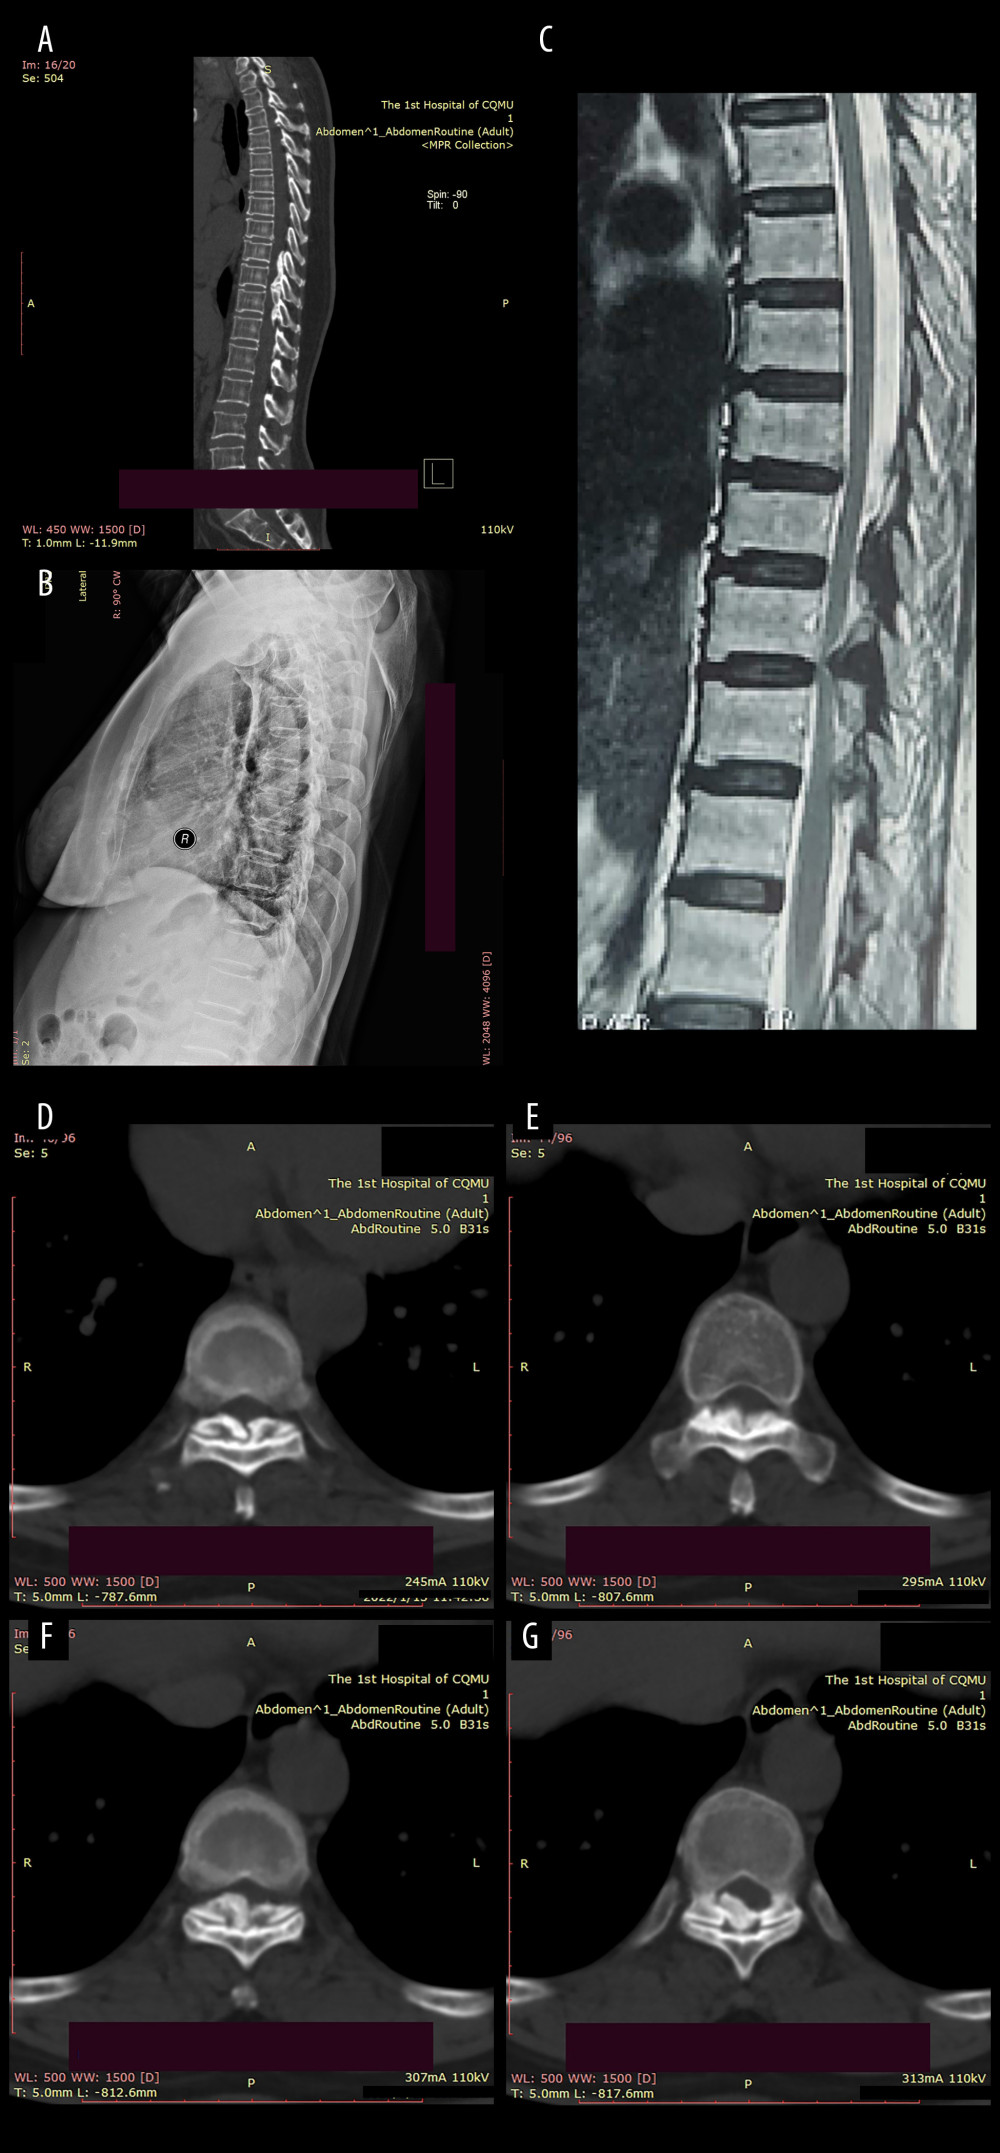 Preoperative imaging data of the patient:(A) Sagittal CT revealed a high-density mass protruding into the spinal canal at the levels of T8–T10, indicating potential spinal cord compression; (B) Preoperative sagittal X-ray of the patient; (C) The MRI plain scan revealed significant stenosis of the spinal canal at the corresponding levels of T8–T10, accompanied by marked compression and narrowing of the adjacent thoracic cord; (D–G) The coronal CT plain scan at T8–10 level revealed high-density ossification that had ruptured into the spinal canal, resulting in significant narrowing of the corresponding canal.